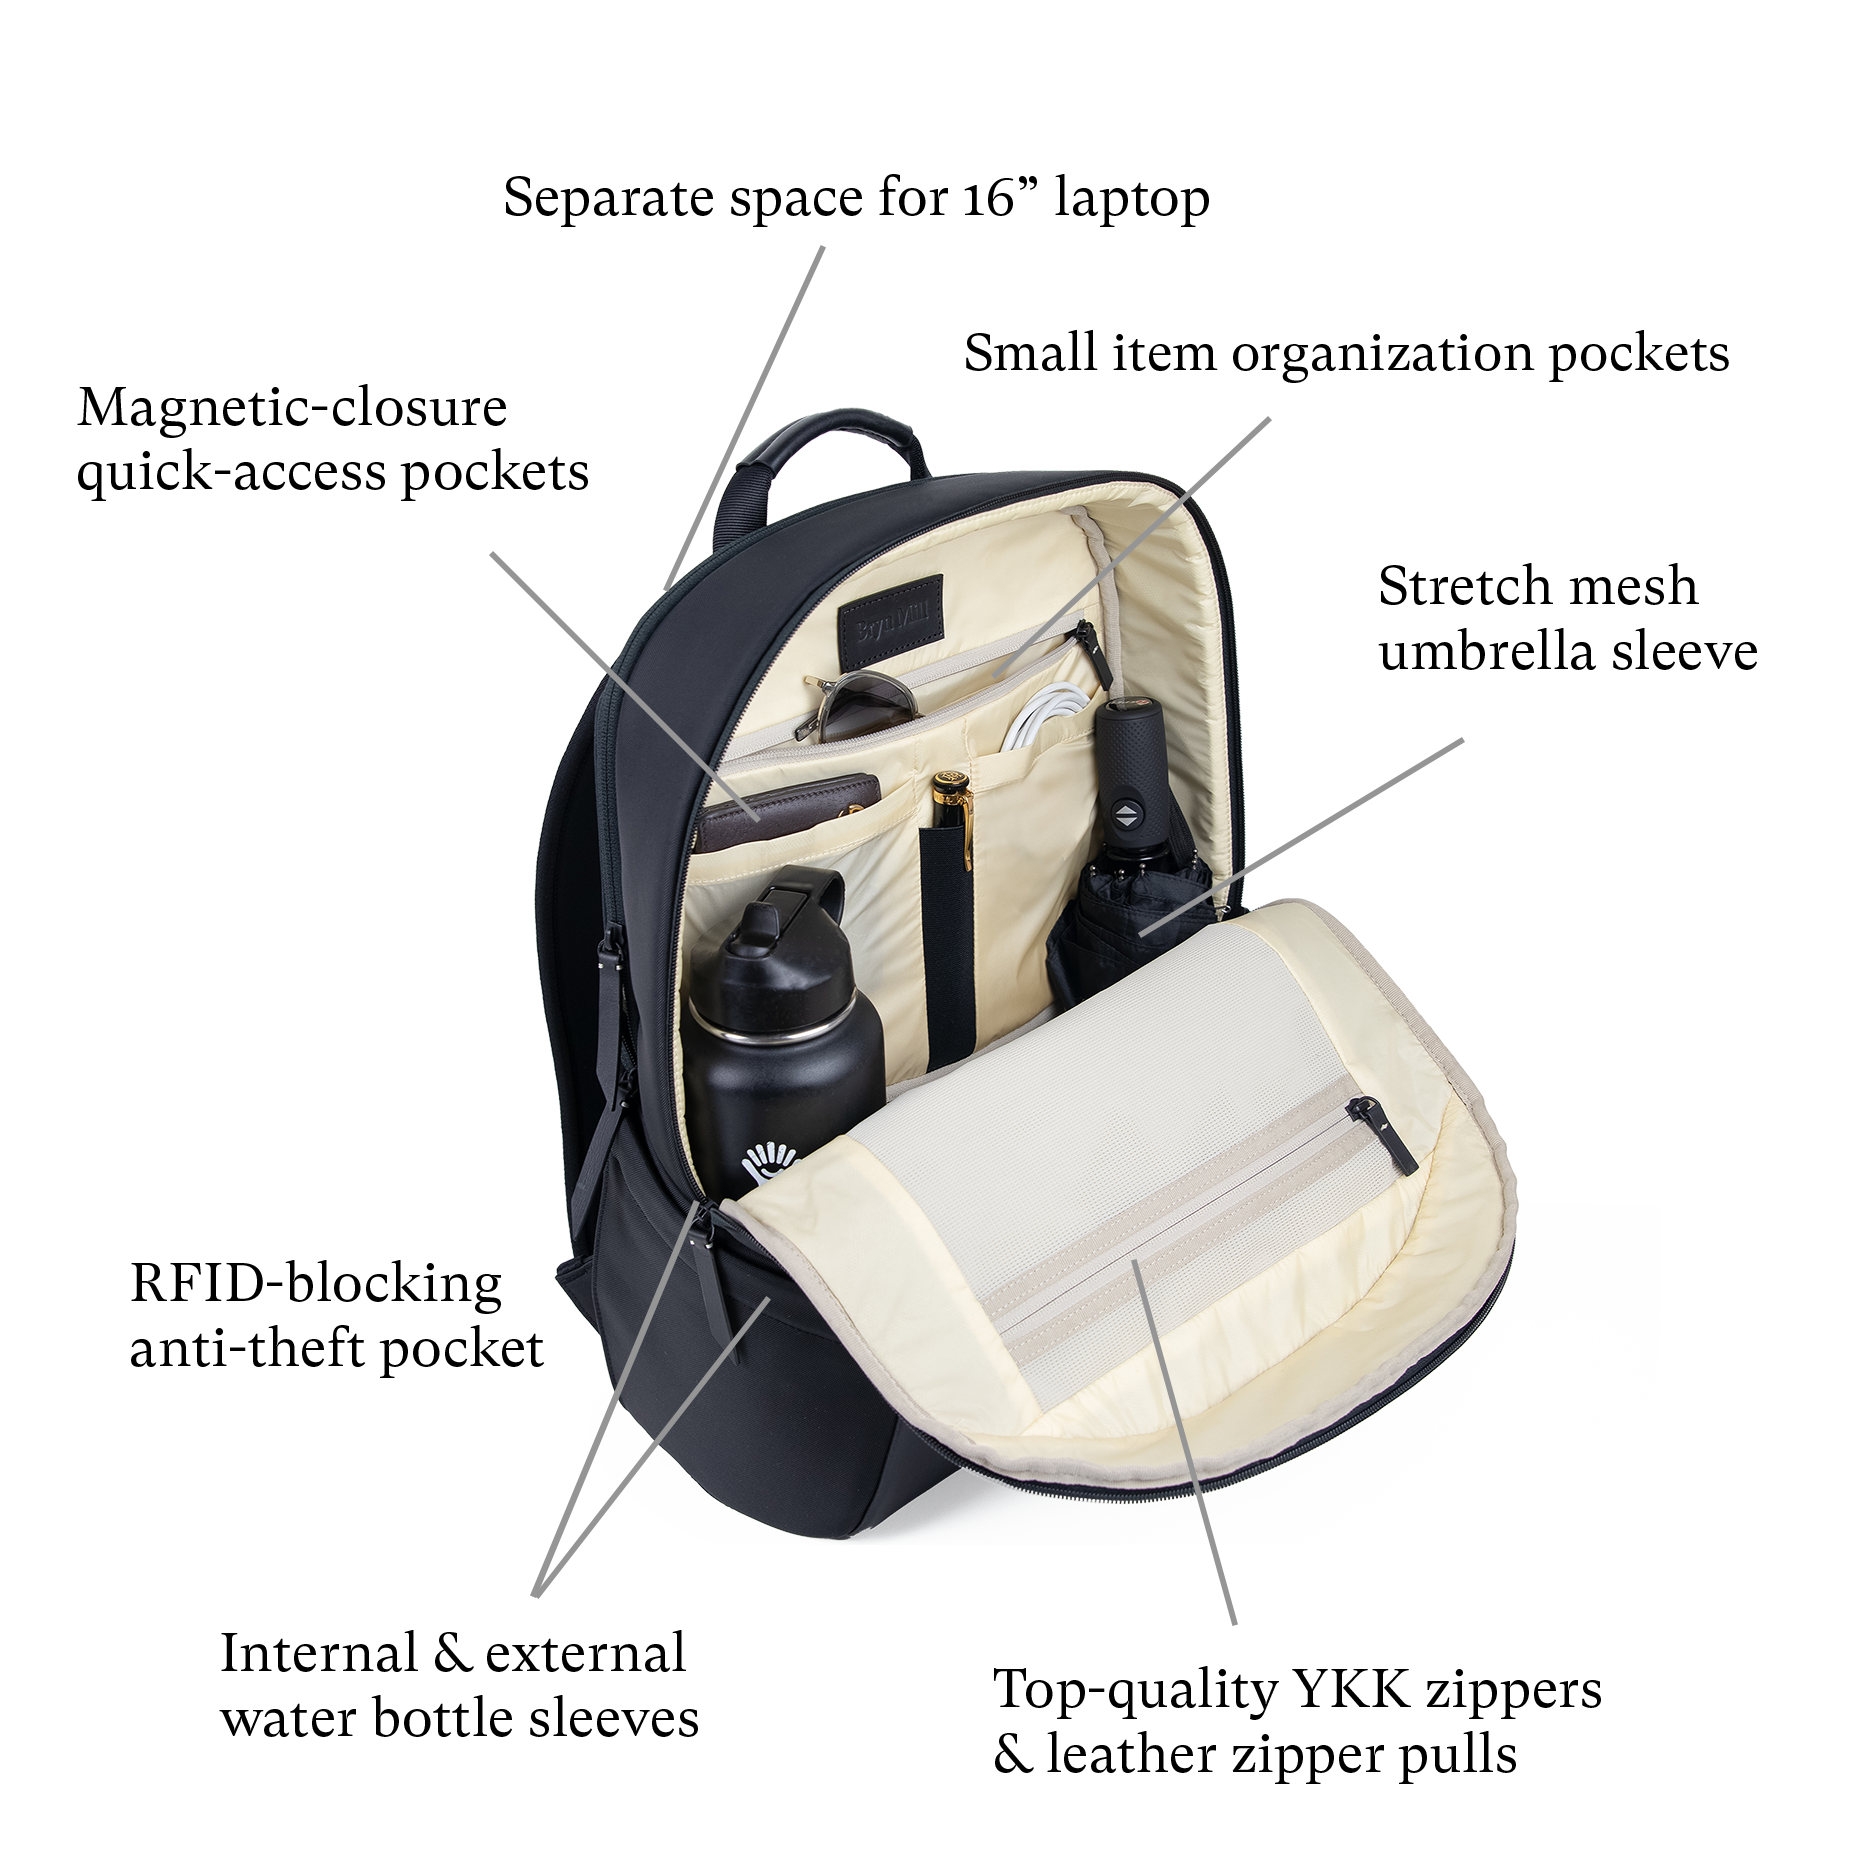 The Work-From-Anywhere Backpack – BRYN MILL